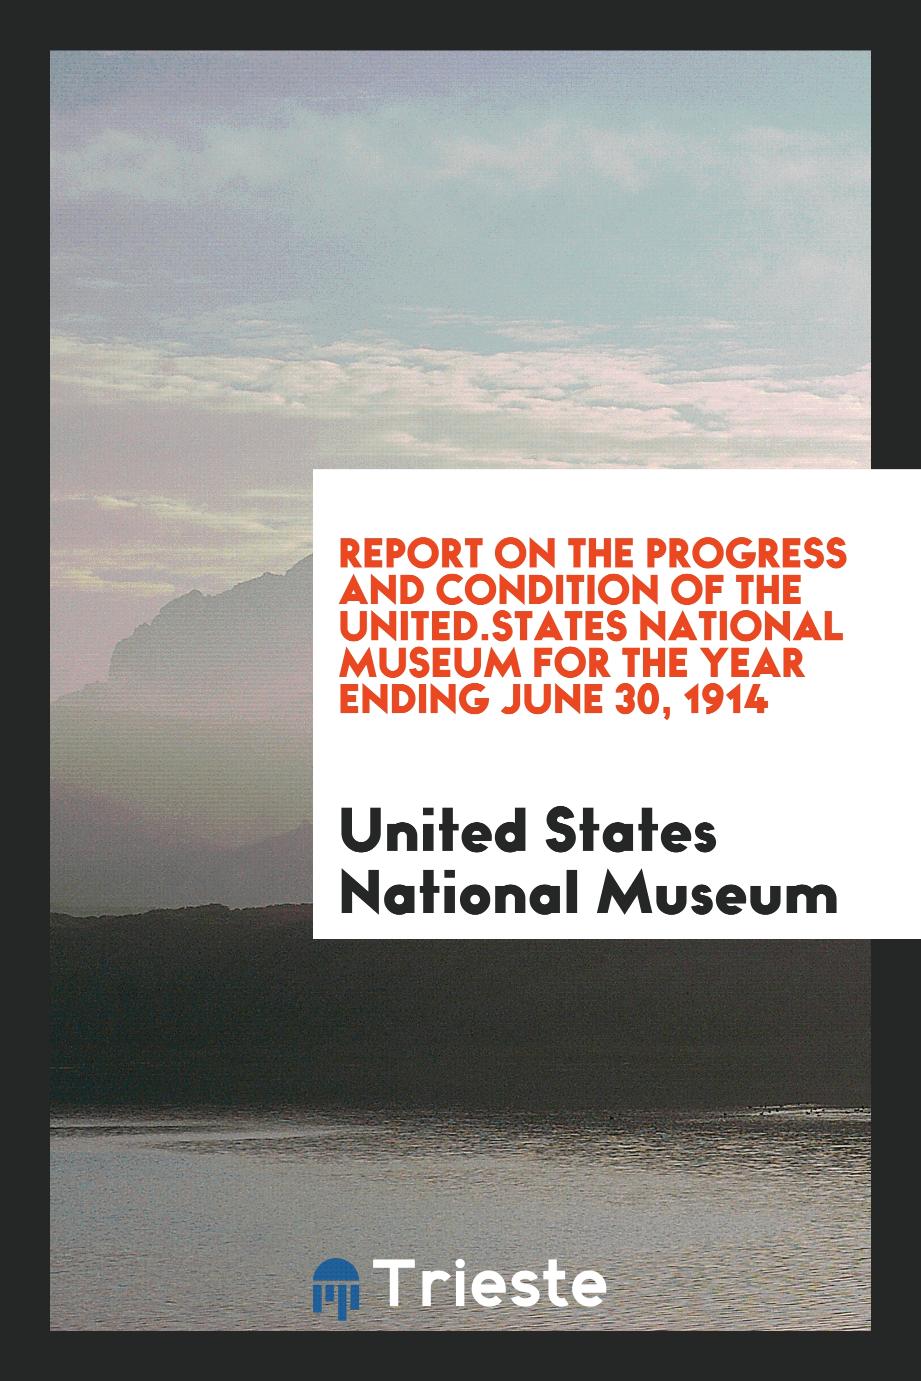 Report on the progress and condition of the United.States National Museum for the year ending June 30, 1914